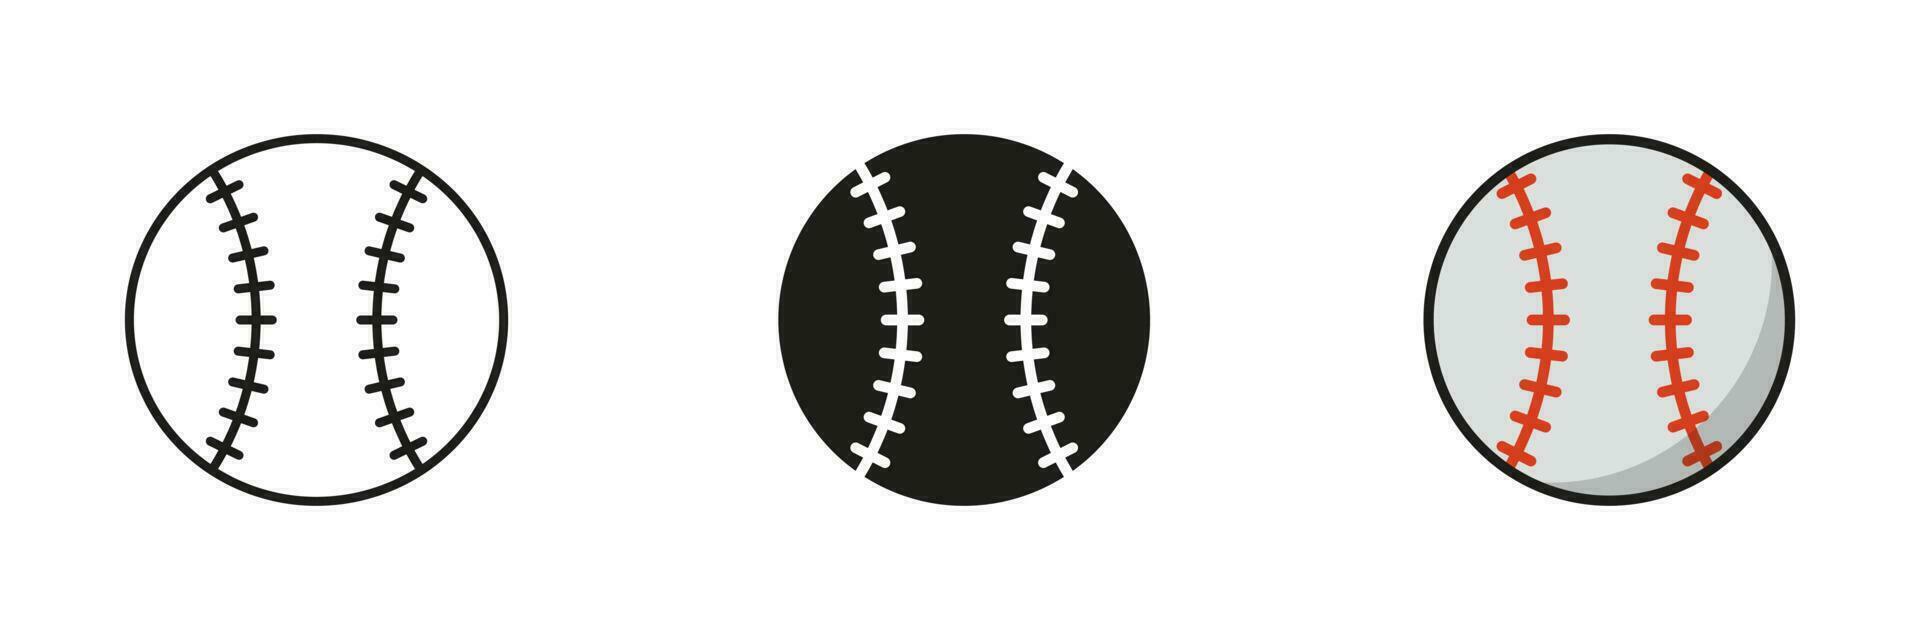 Baseball Ball Silhouette and Line Icon Set. Ball for Play Sports Game Solid and Outline Black and Color Symbol Collection on White Background. Isolated Vector Illustration.